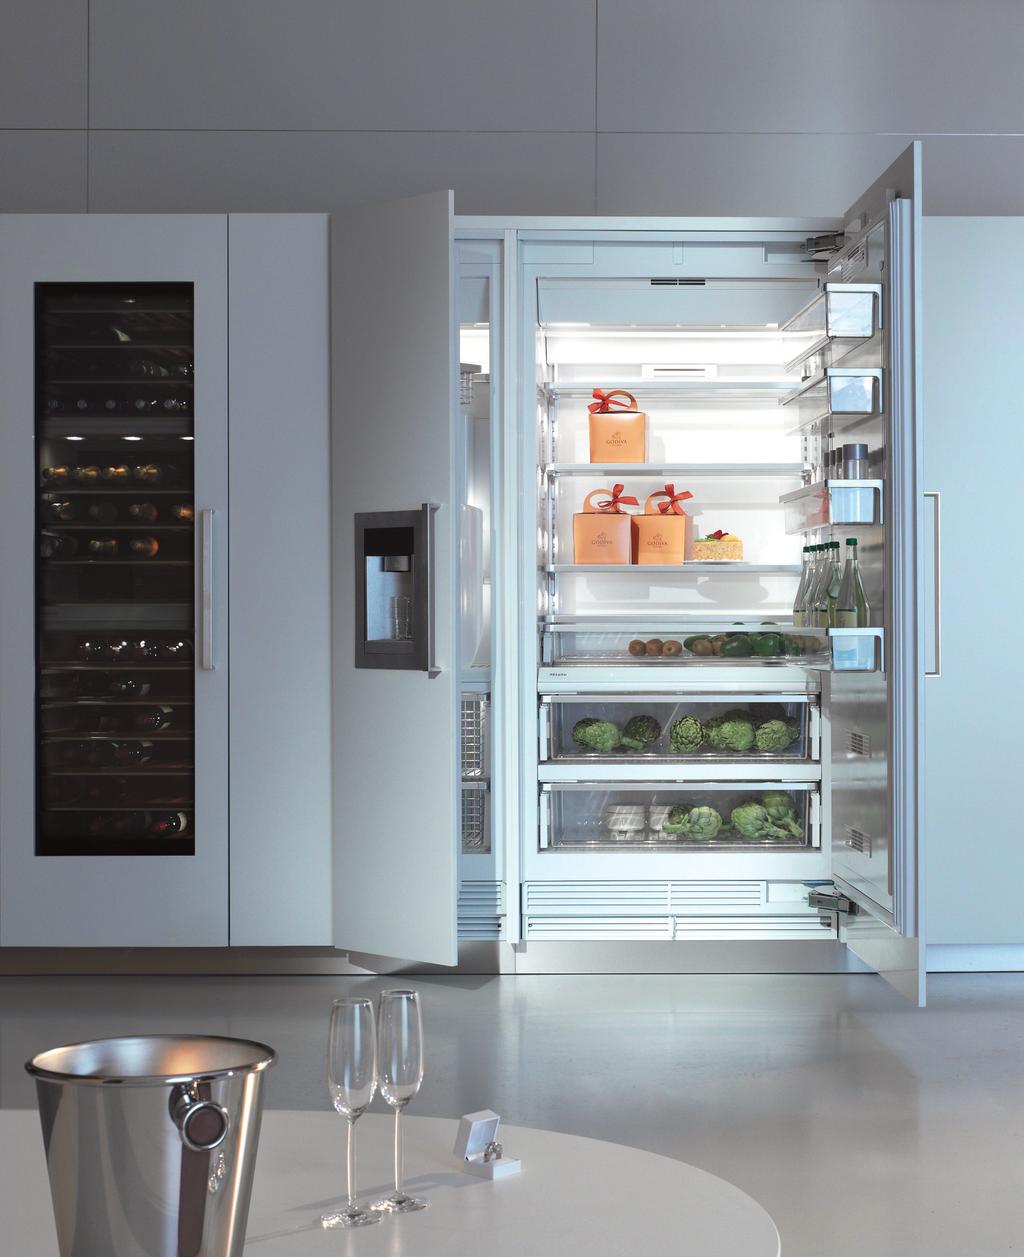 Miele MasterCool Stunning large-capacity flagship appliances Miele's large-capacity MasterCool appliances set new standards in terms of